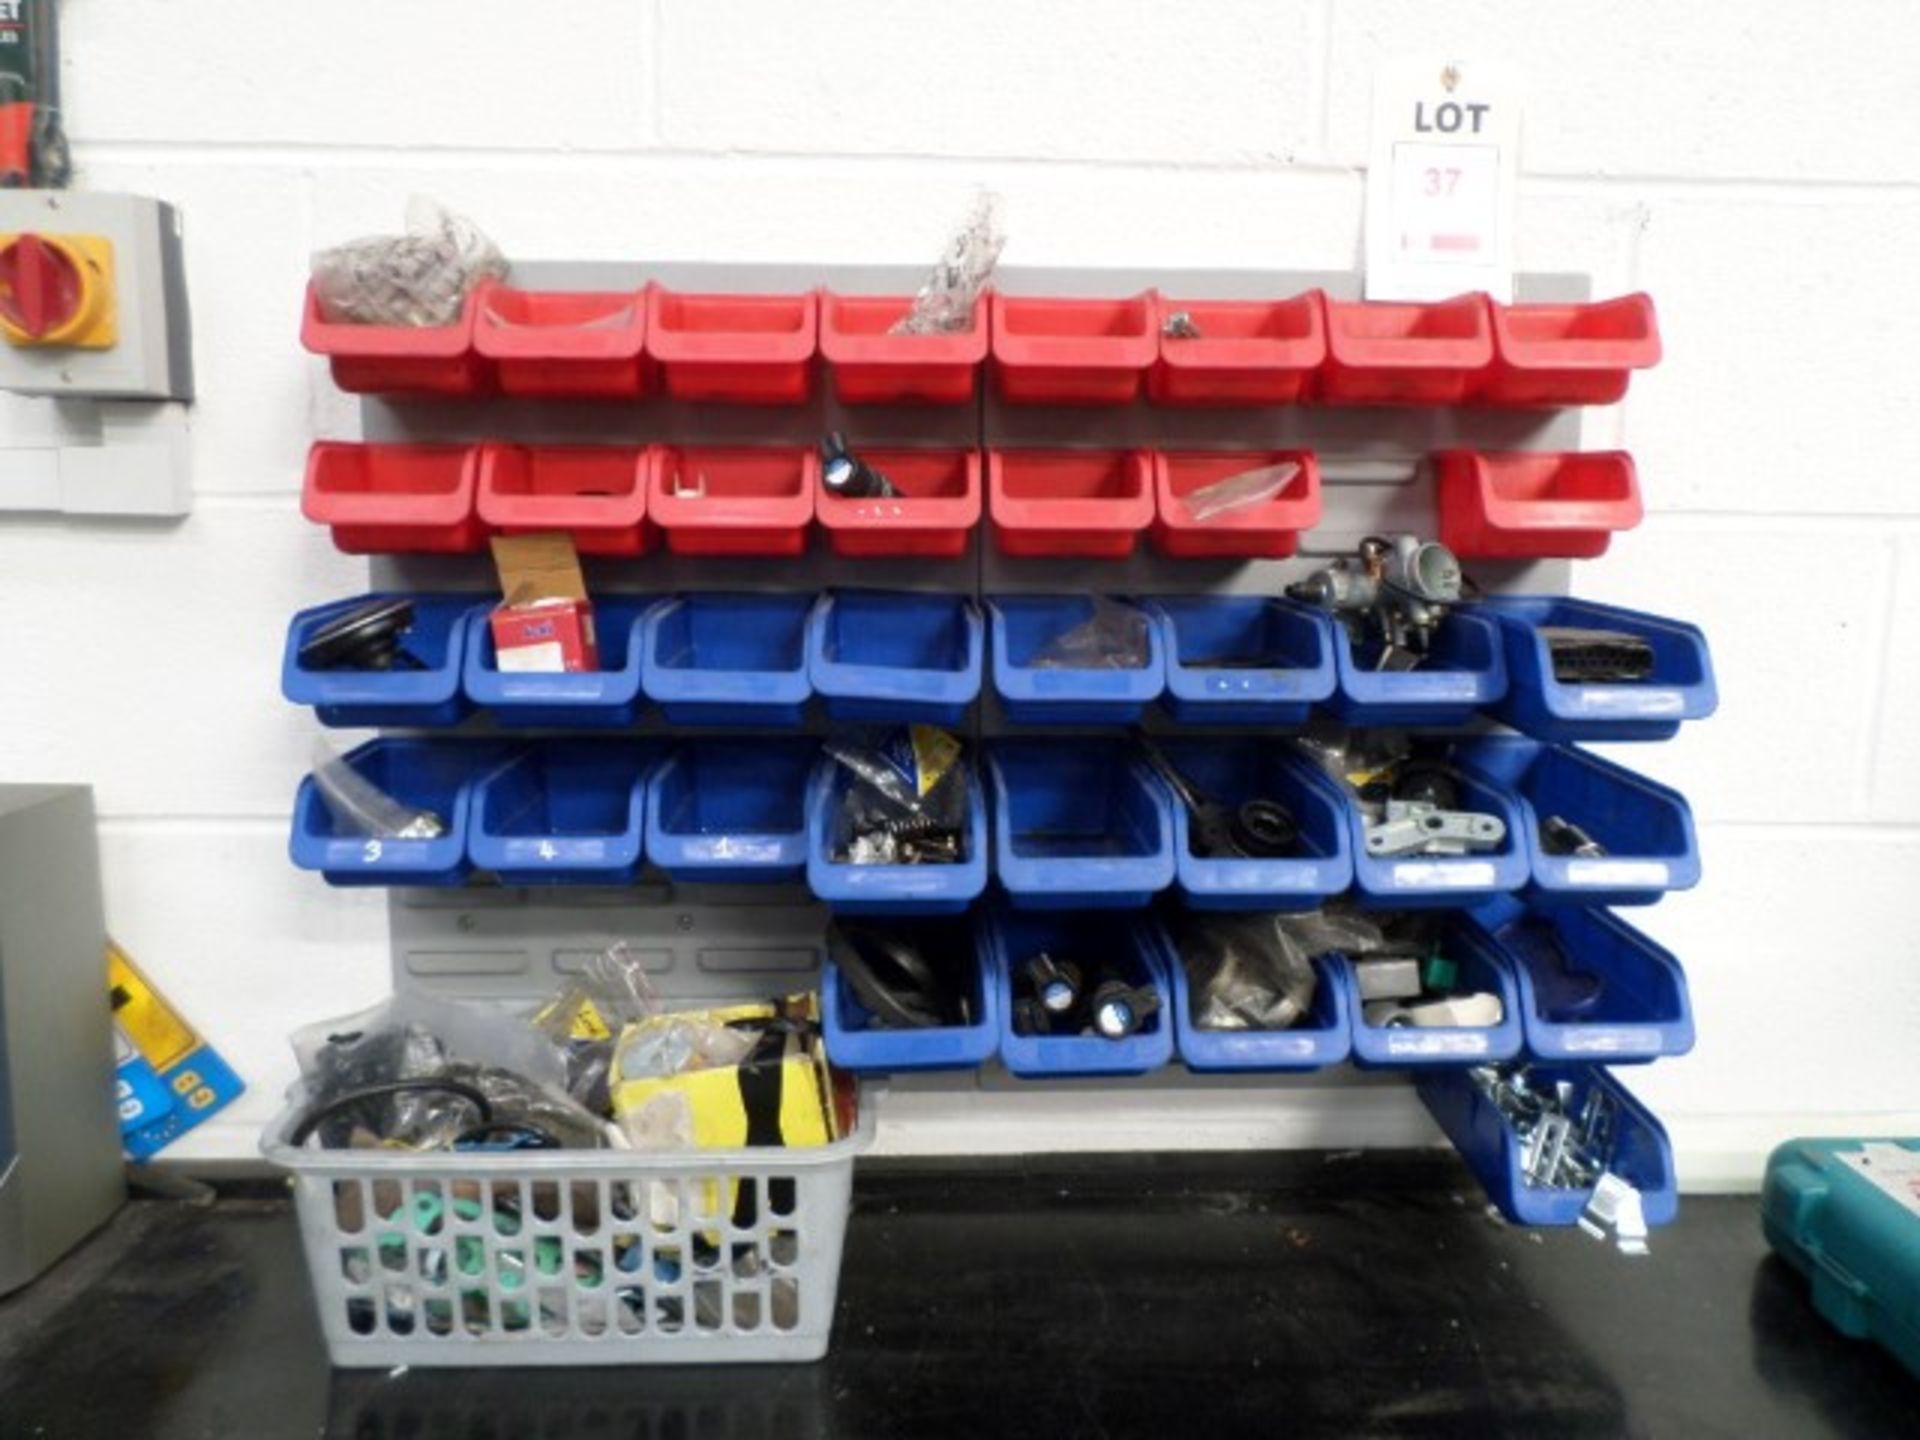 2 wall boards with 38 plastic storage bins and contents